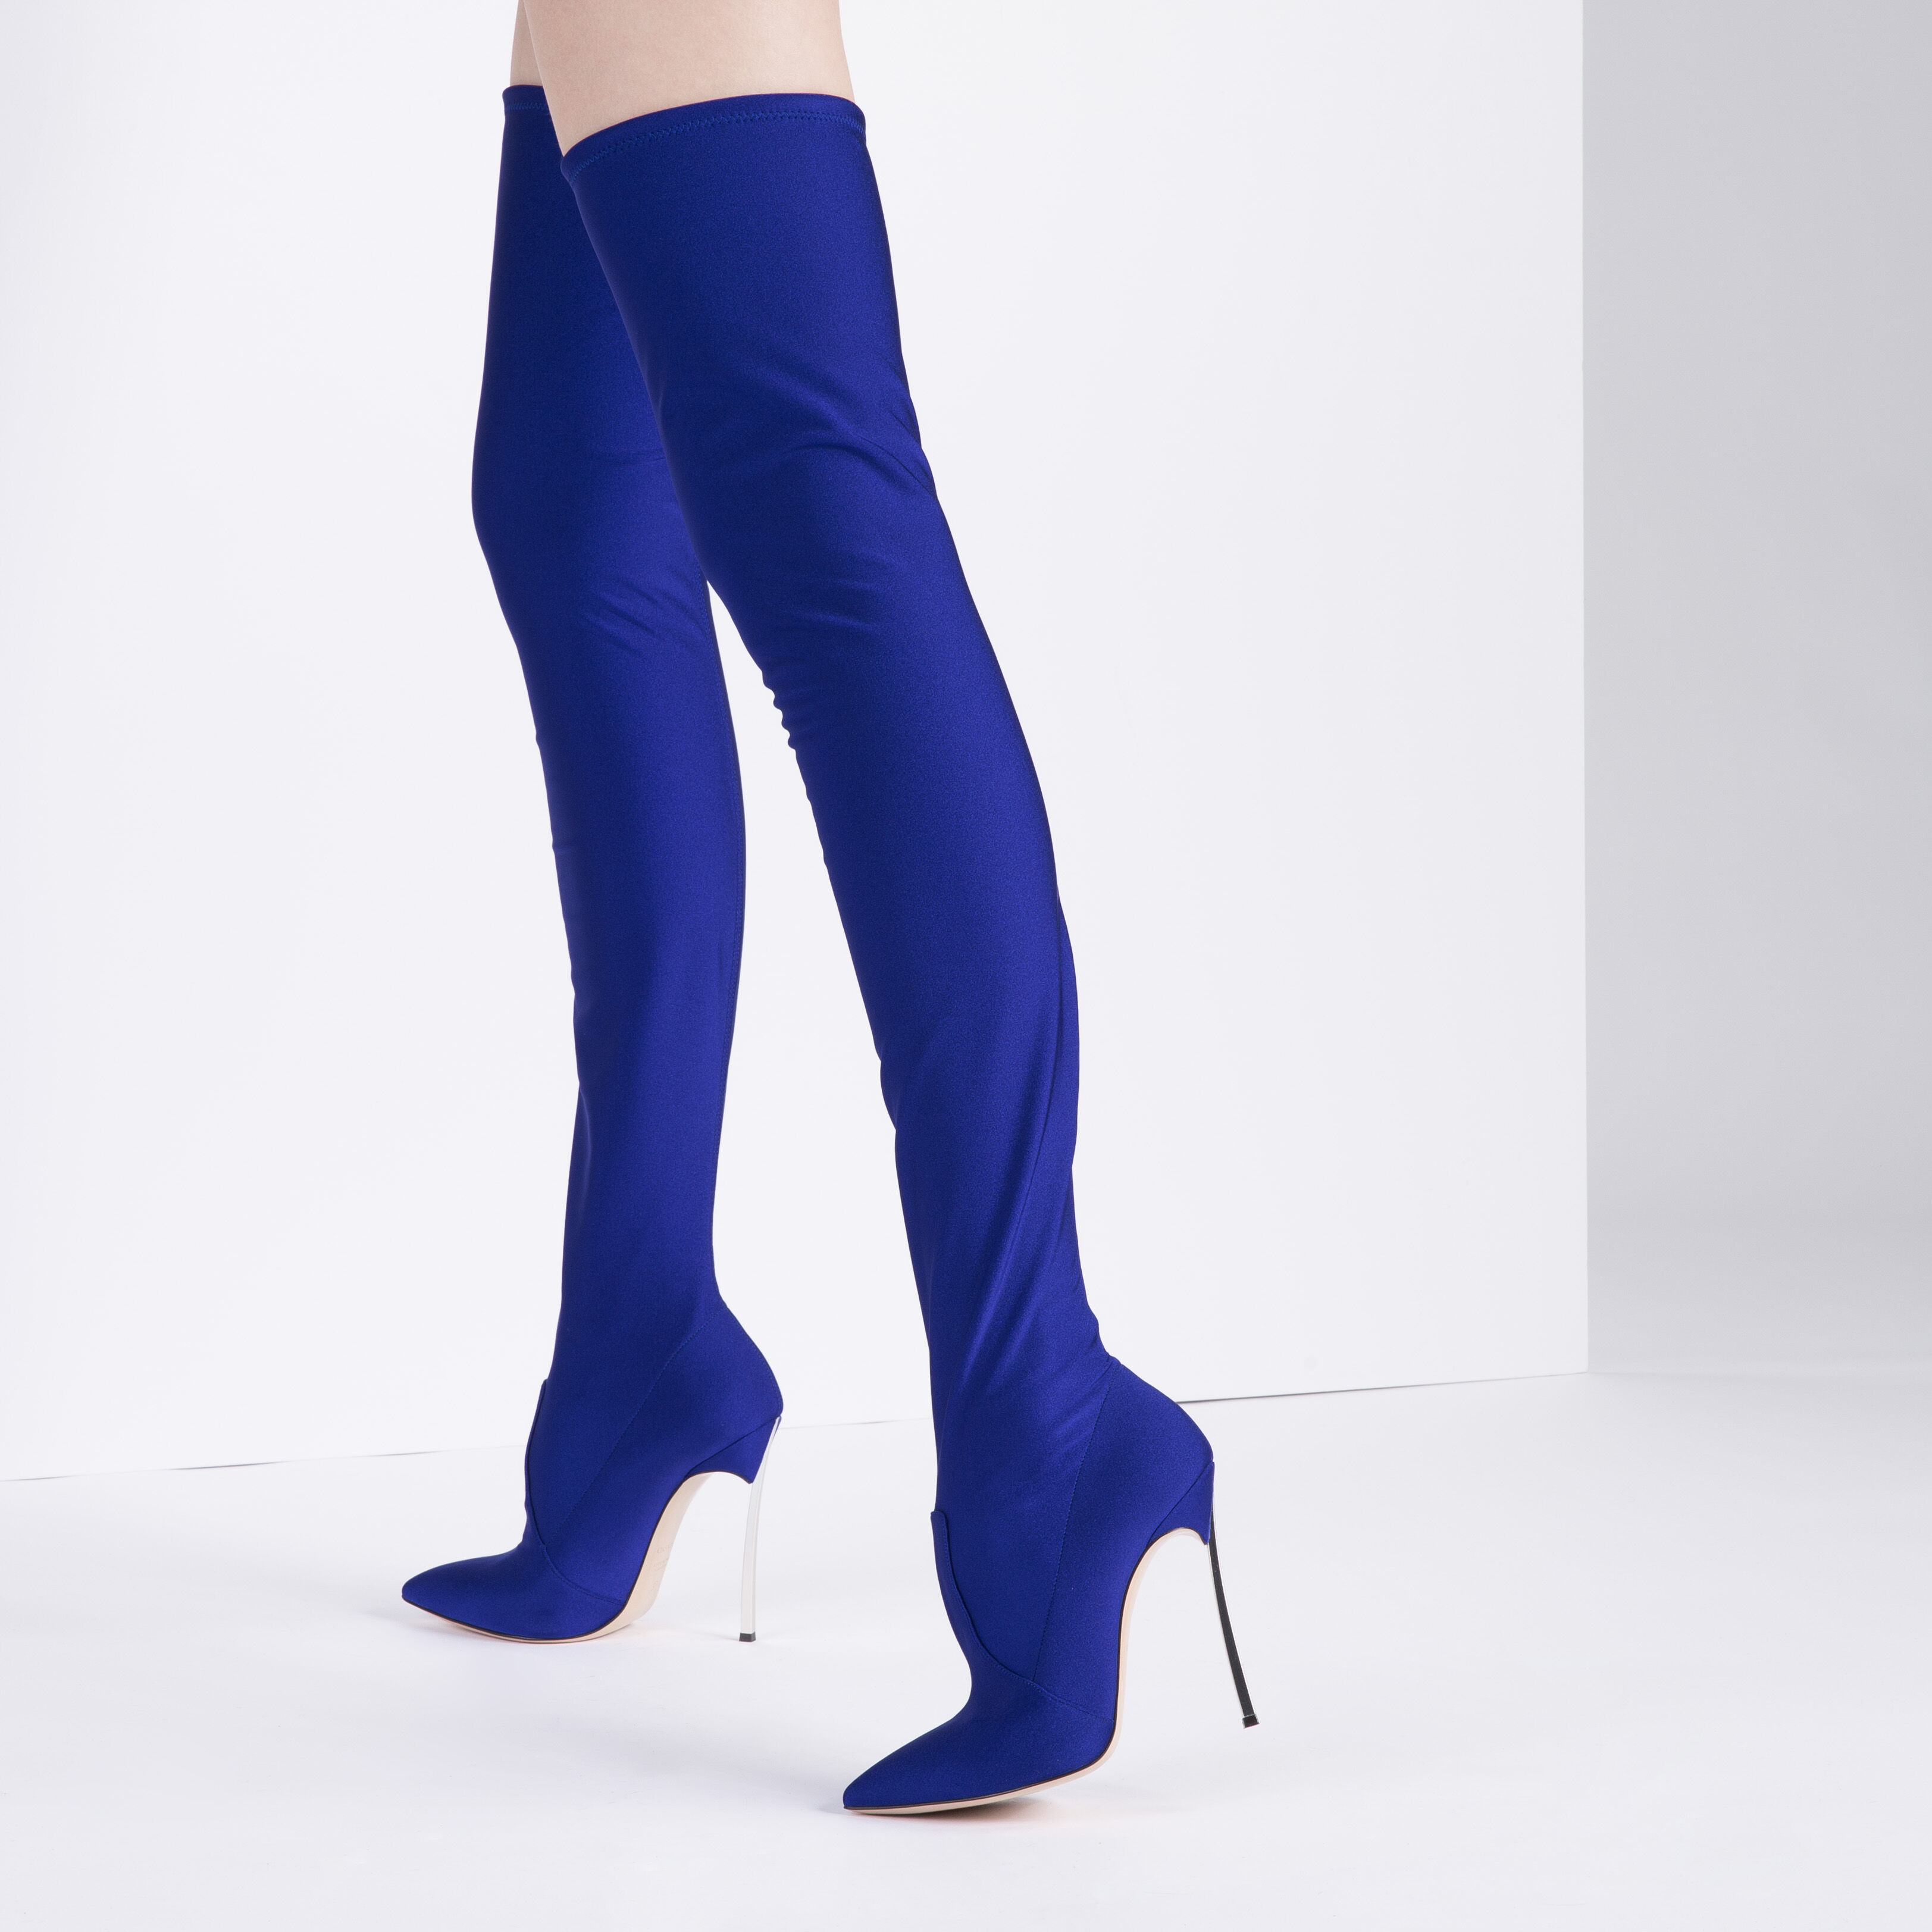 electric blue knee high boots